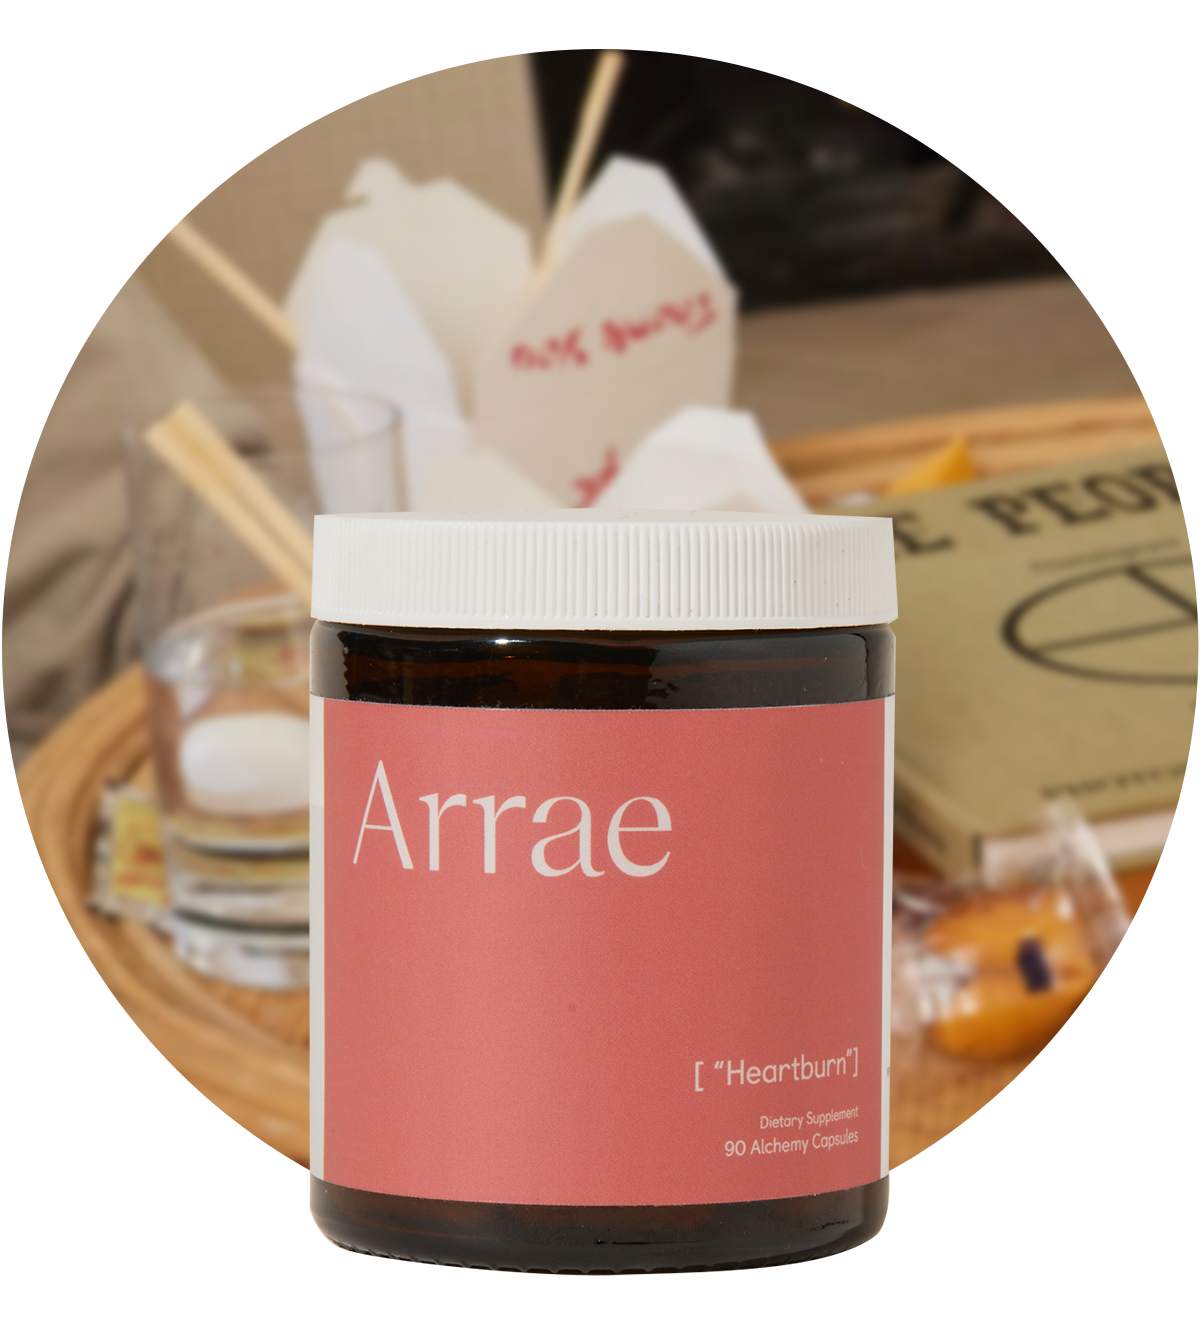 Arrae Heartburn Supplement - A bottle of 90 capsules containing natural ingredients, designed to prevent heartburn and acid reflux in the moment and target the root cause for long-term relief.